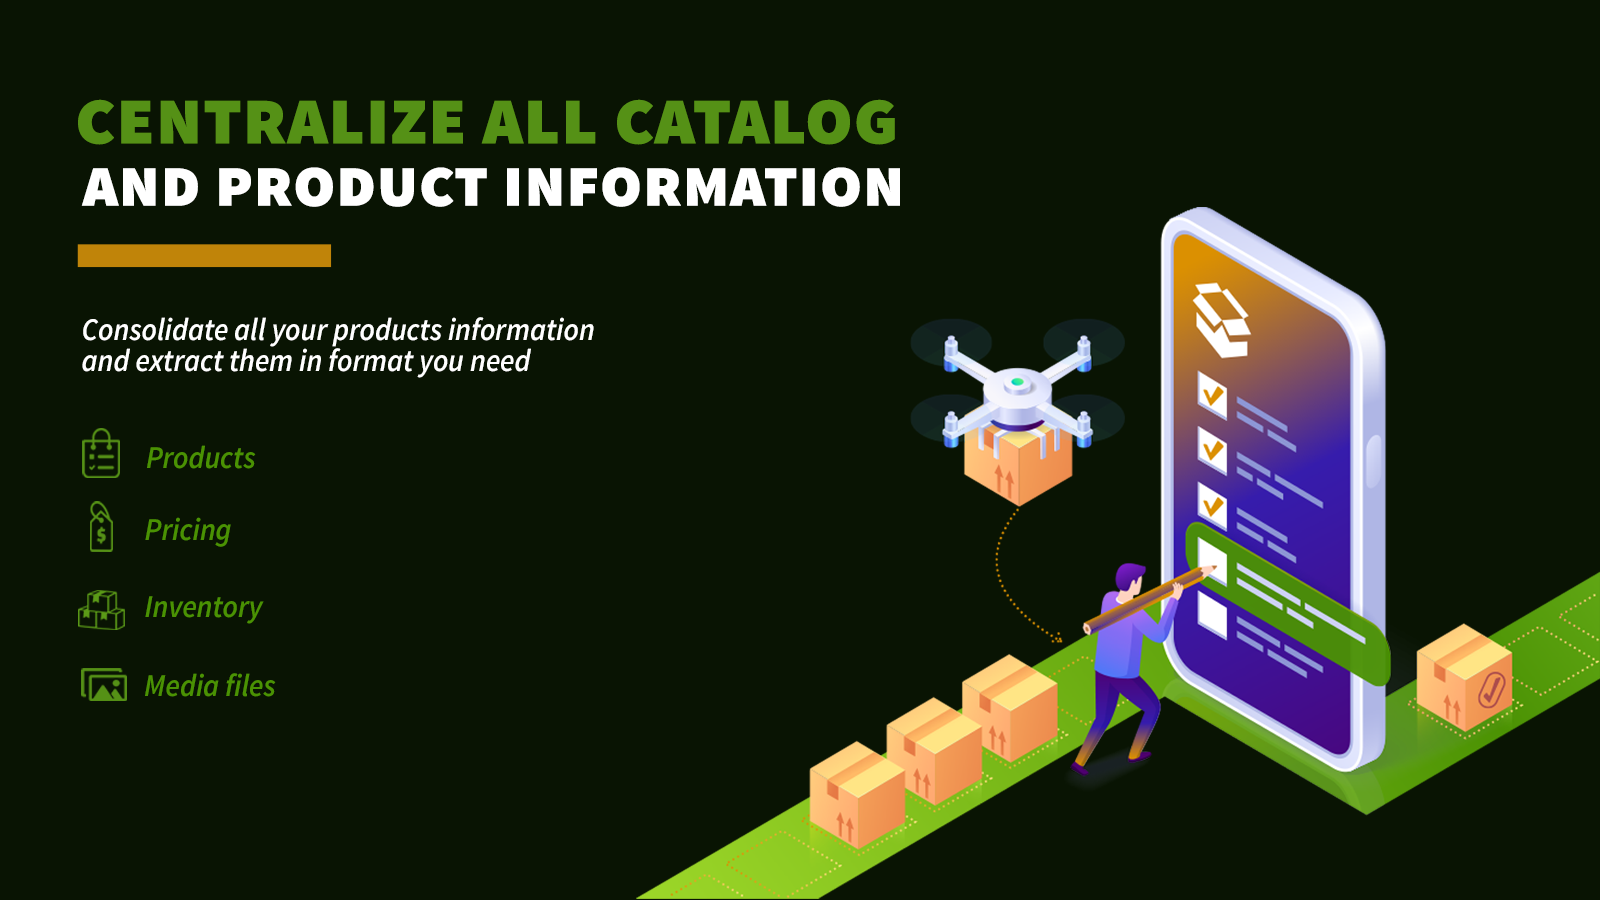 Centralize all catalog and product information